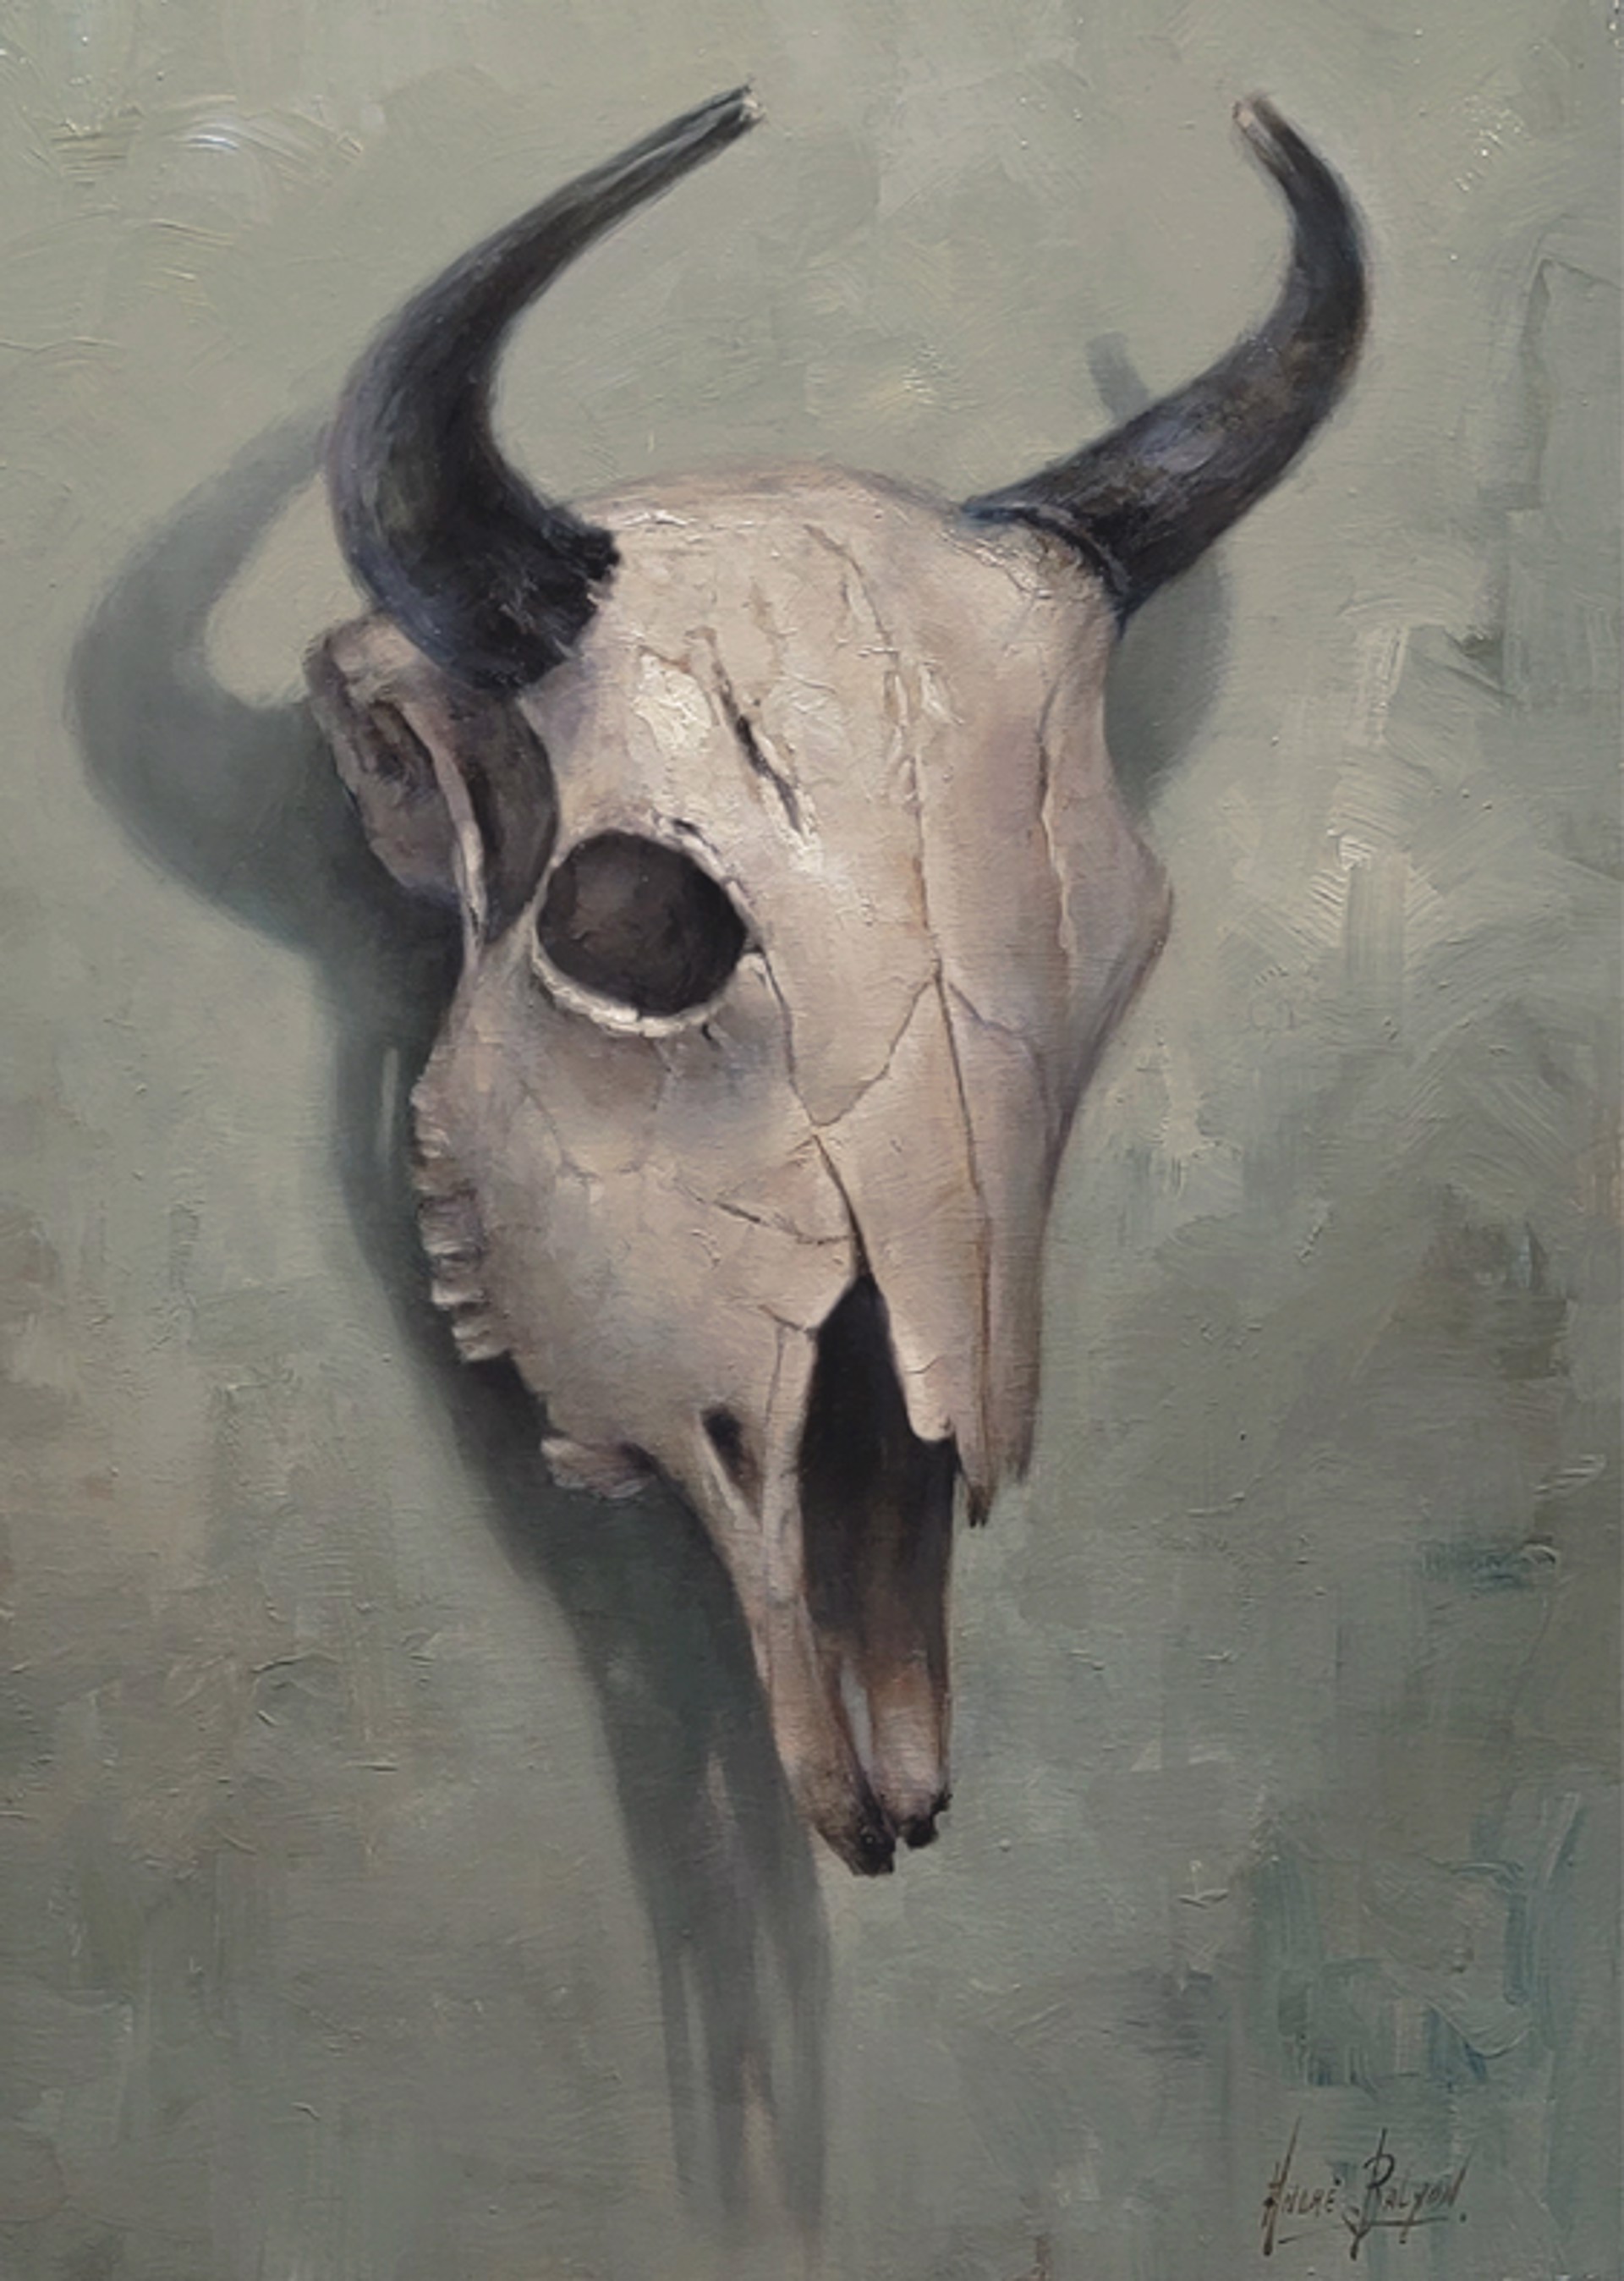 The Bison Skull by André Balyon